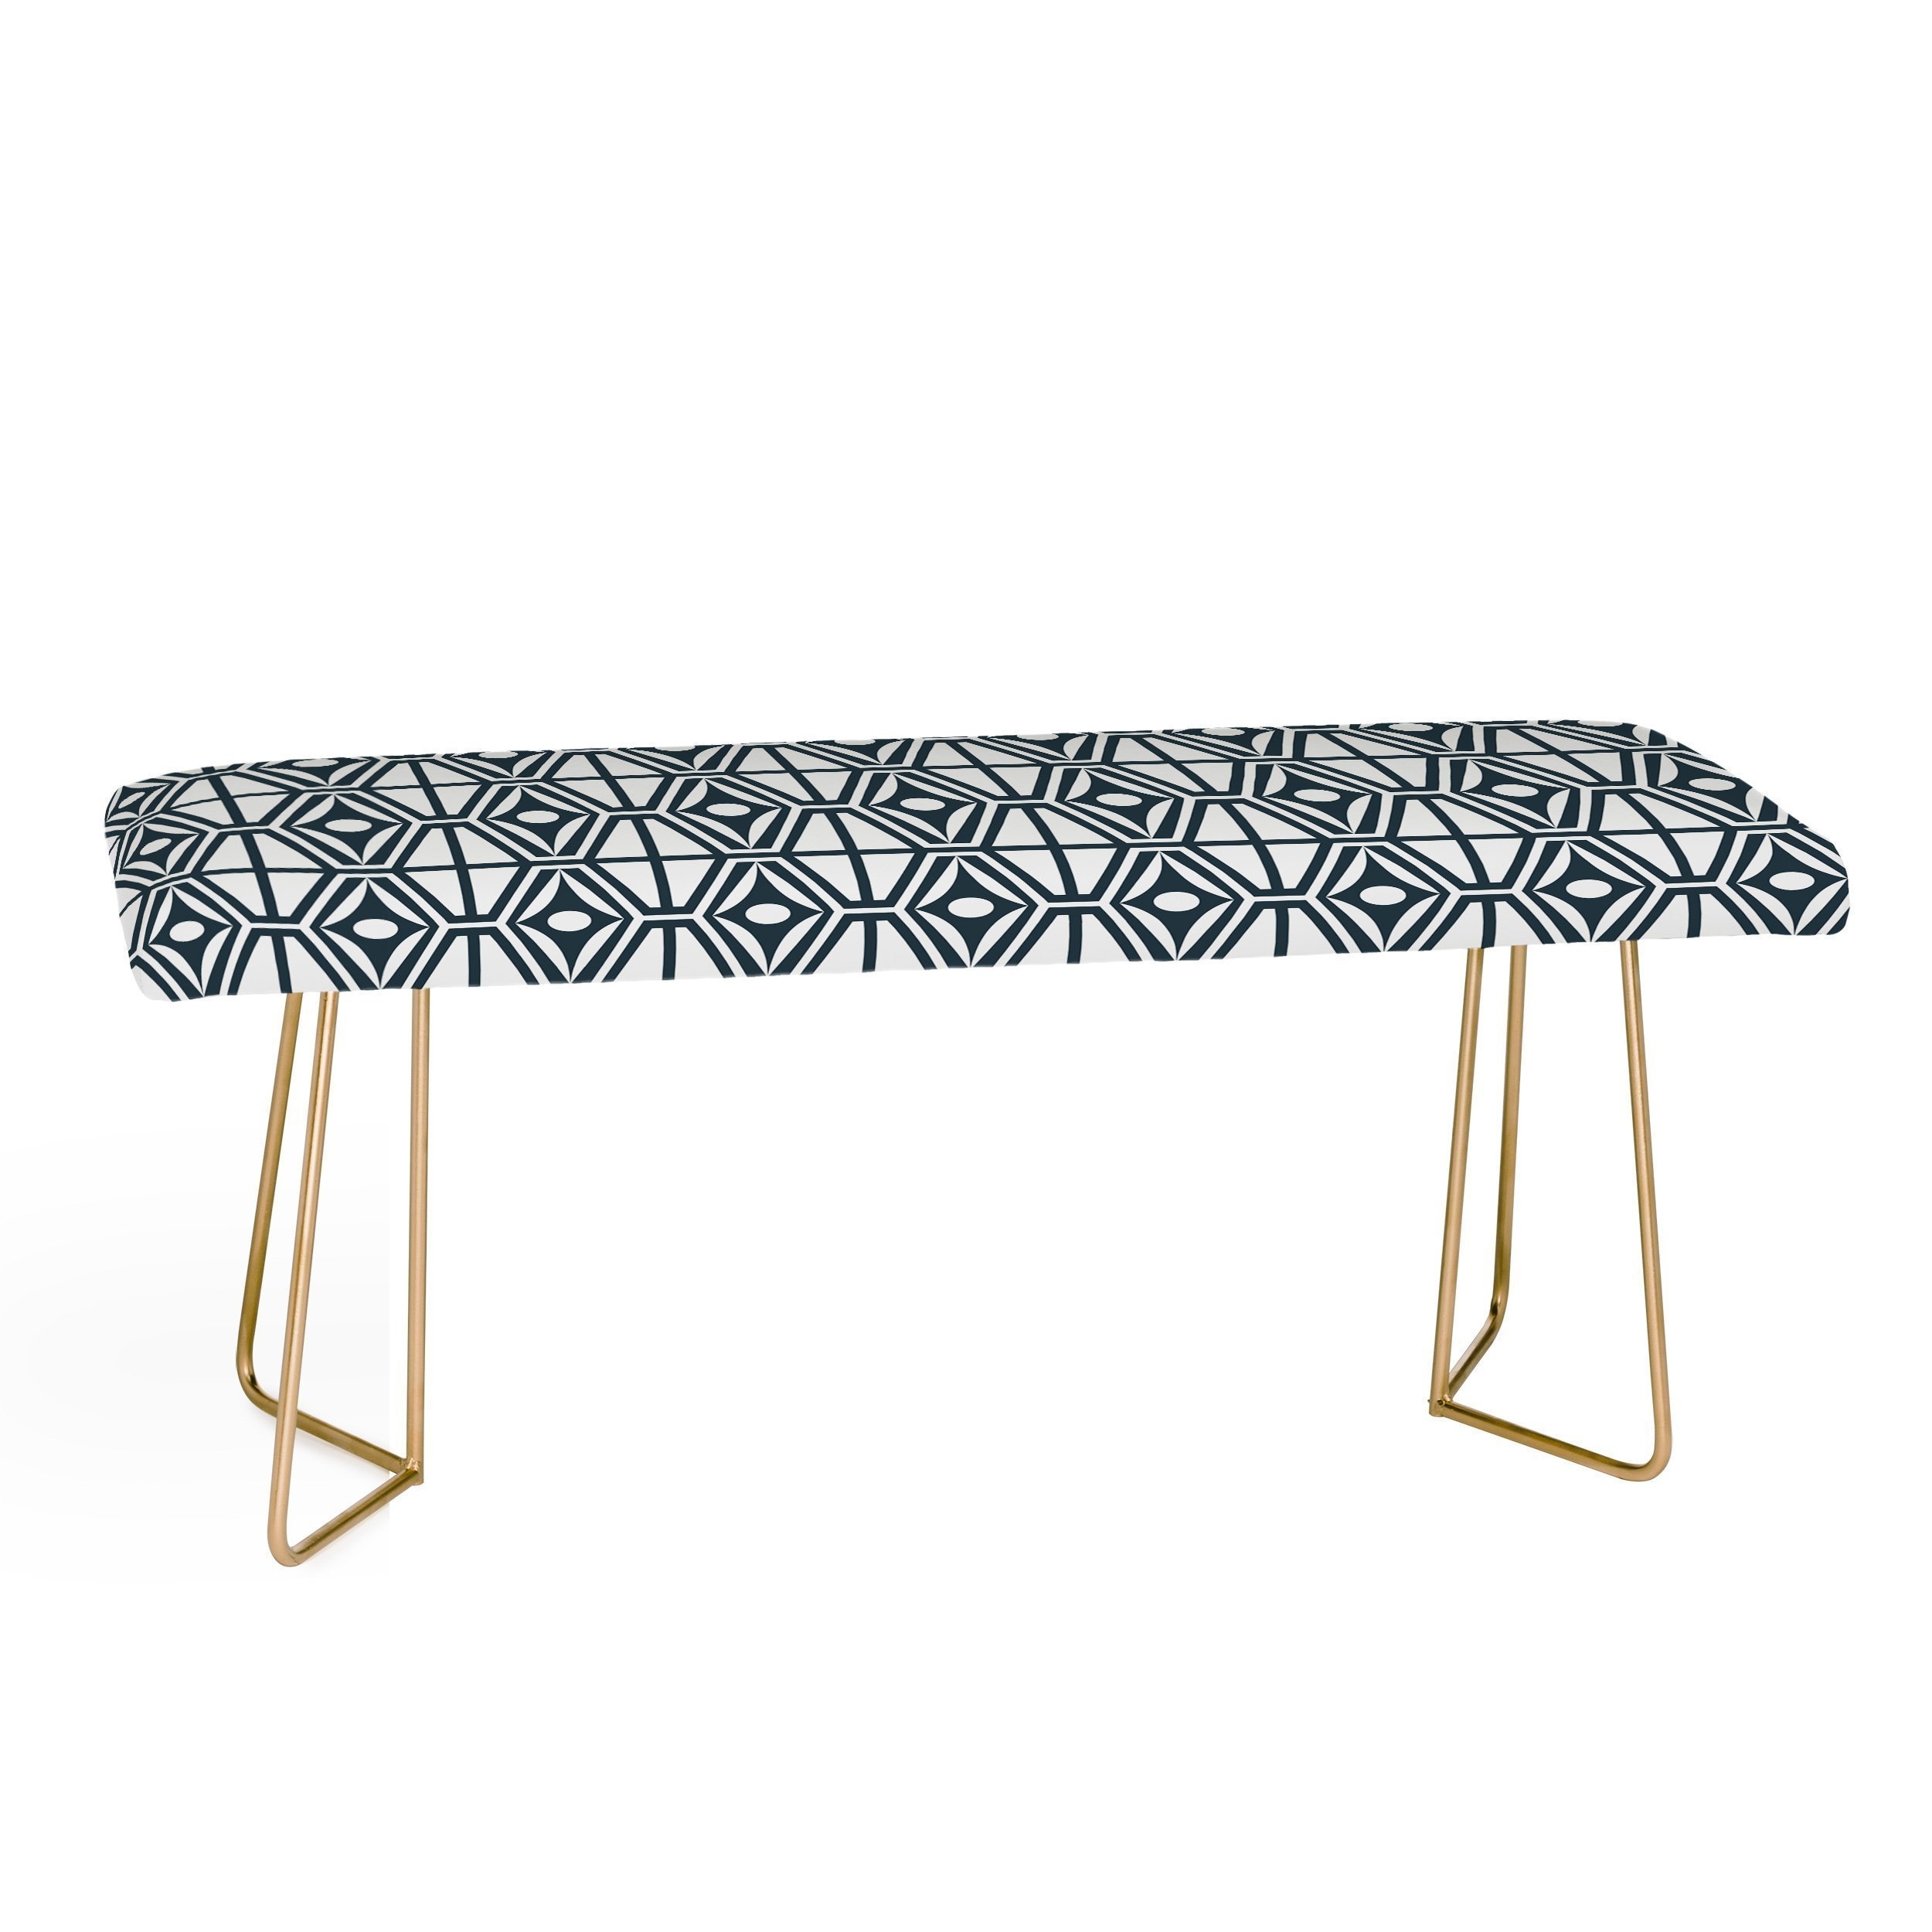 METRO STEEL Bench by Heather Dutton - Gold - Image 0